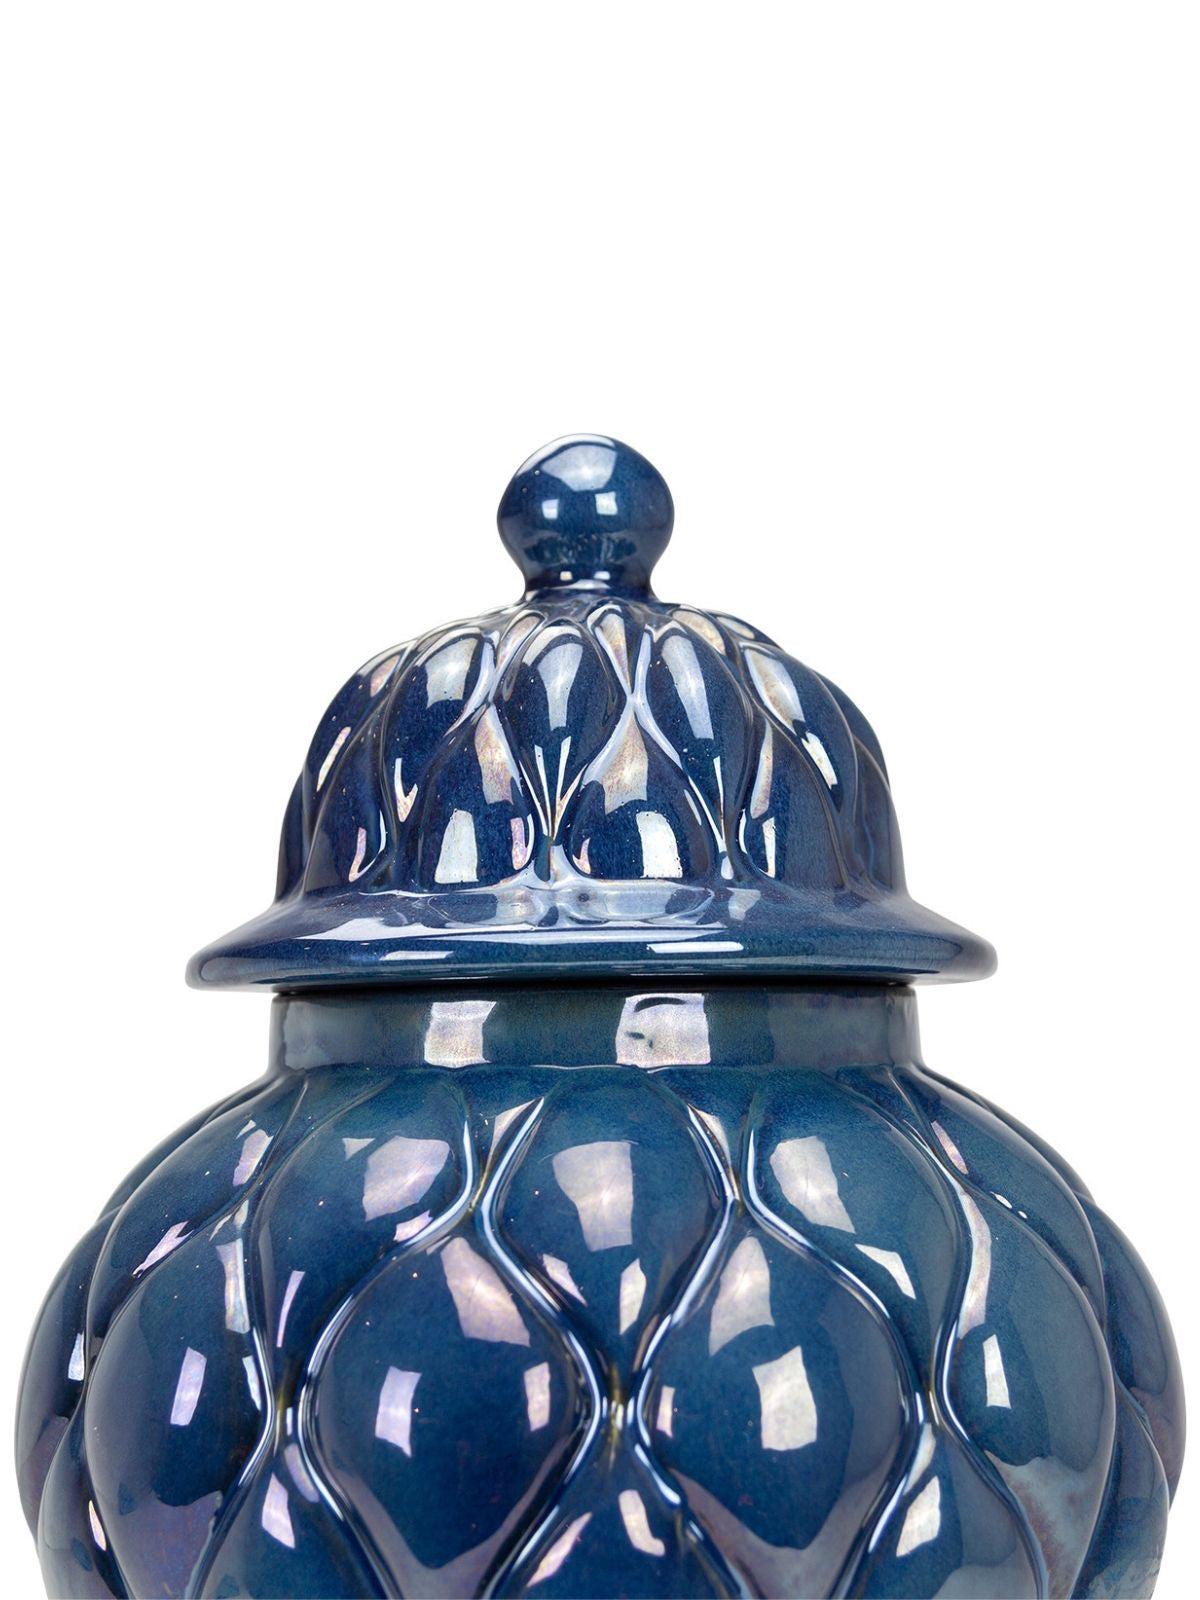 Sapphire Blue Ceramic Ginger Jar with Quilt Pattern and Lid on top, Sold by KYA Home Decor.